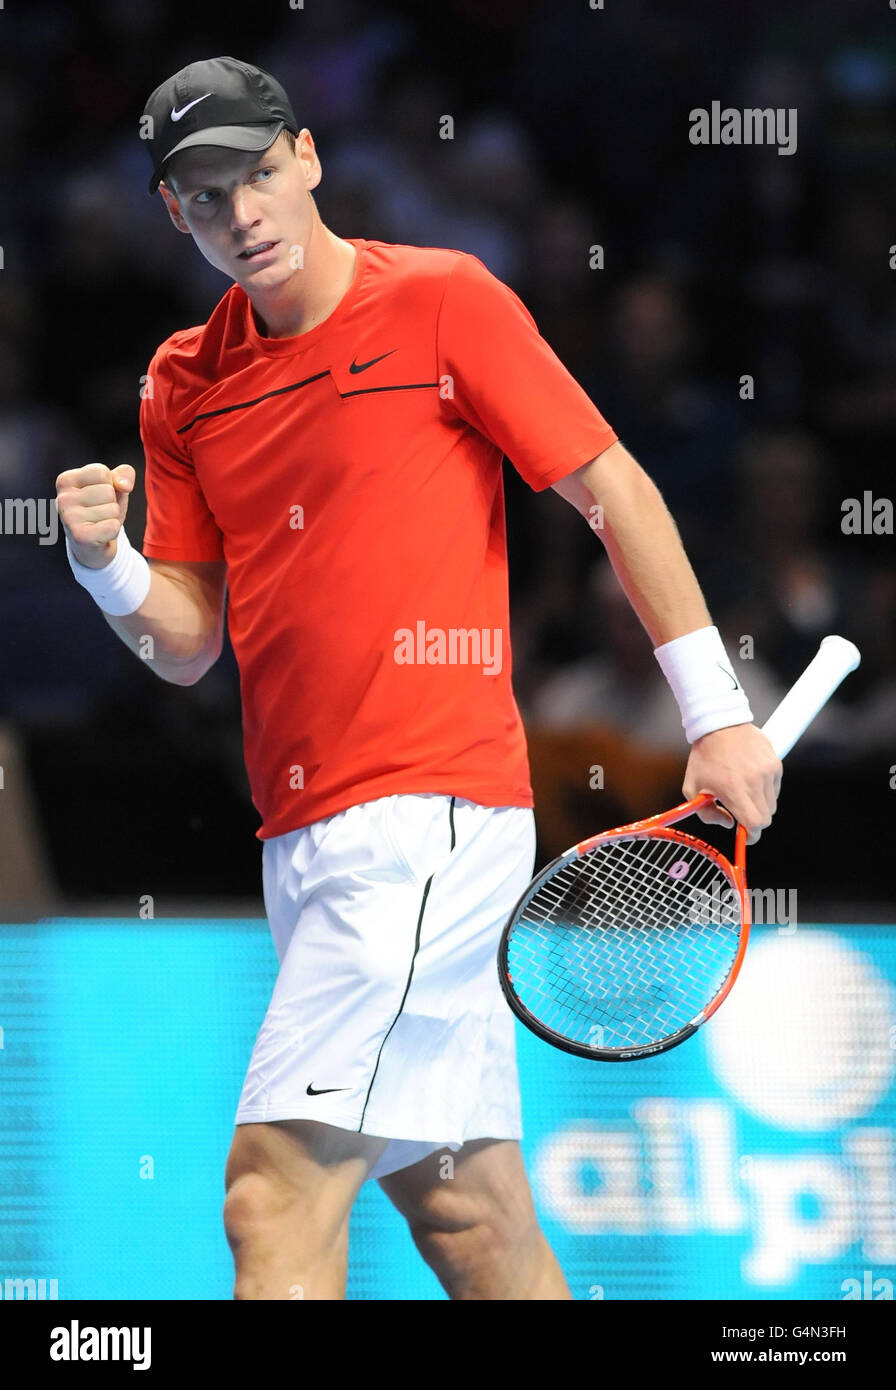 Czech Republic's Tomas Berdych reacts during his match against Serbia's Janko Tipsarevic during the Barclays ATP World Tour Finals at the O2 Arena, London. Stock Photo